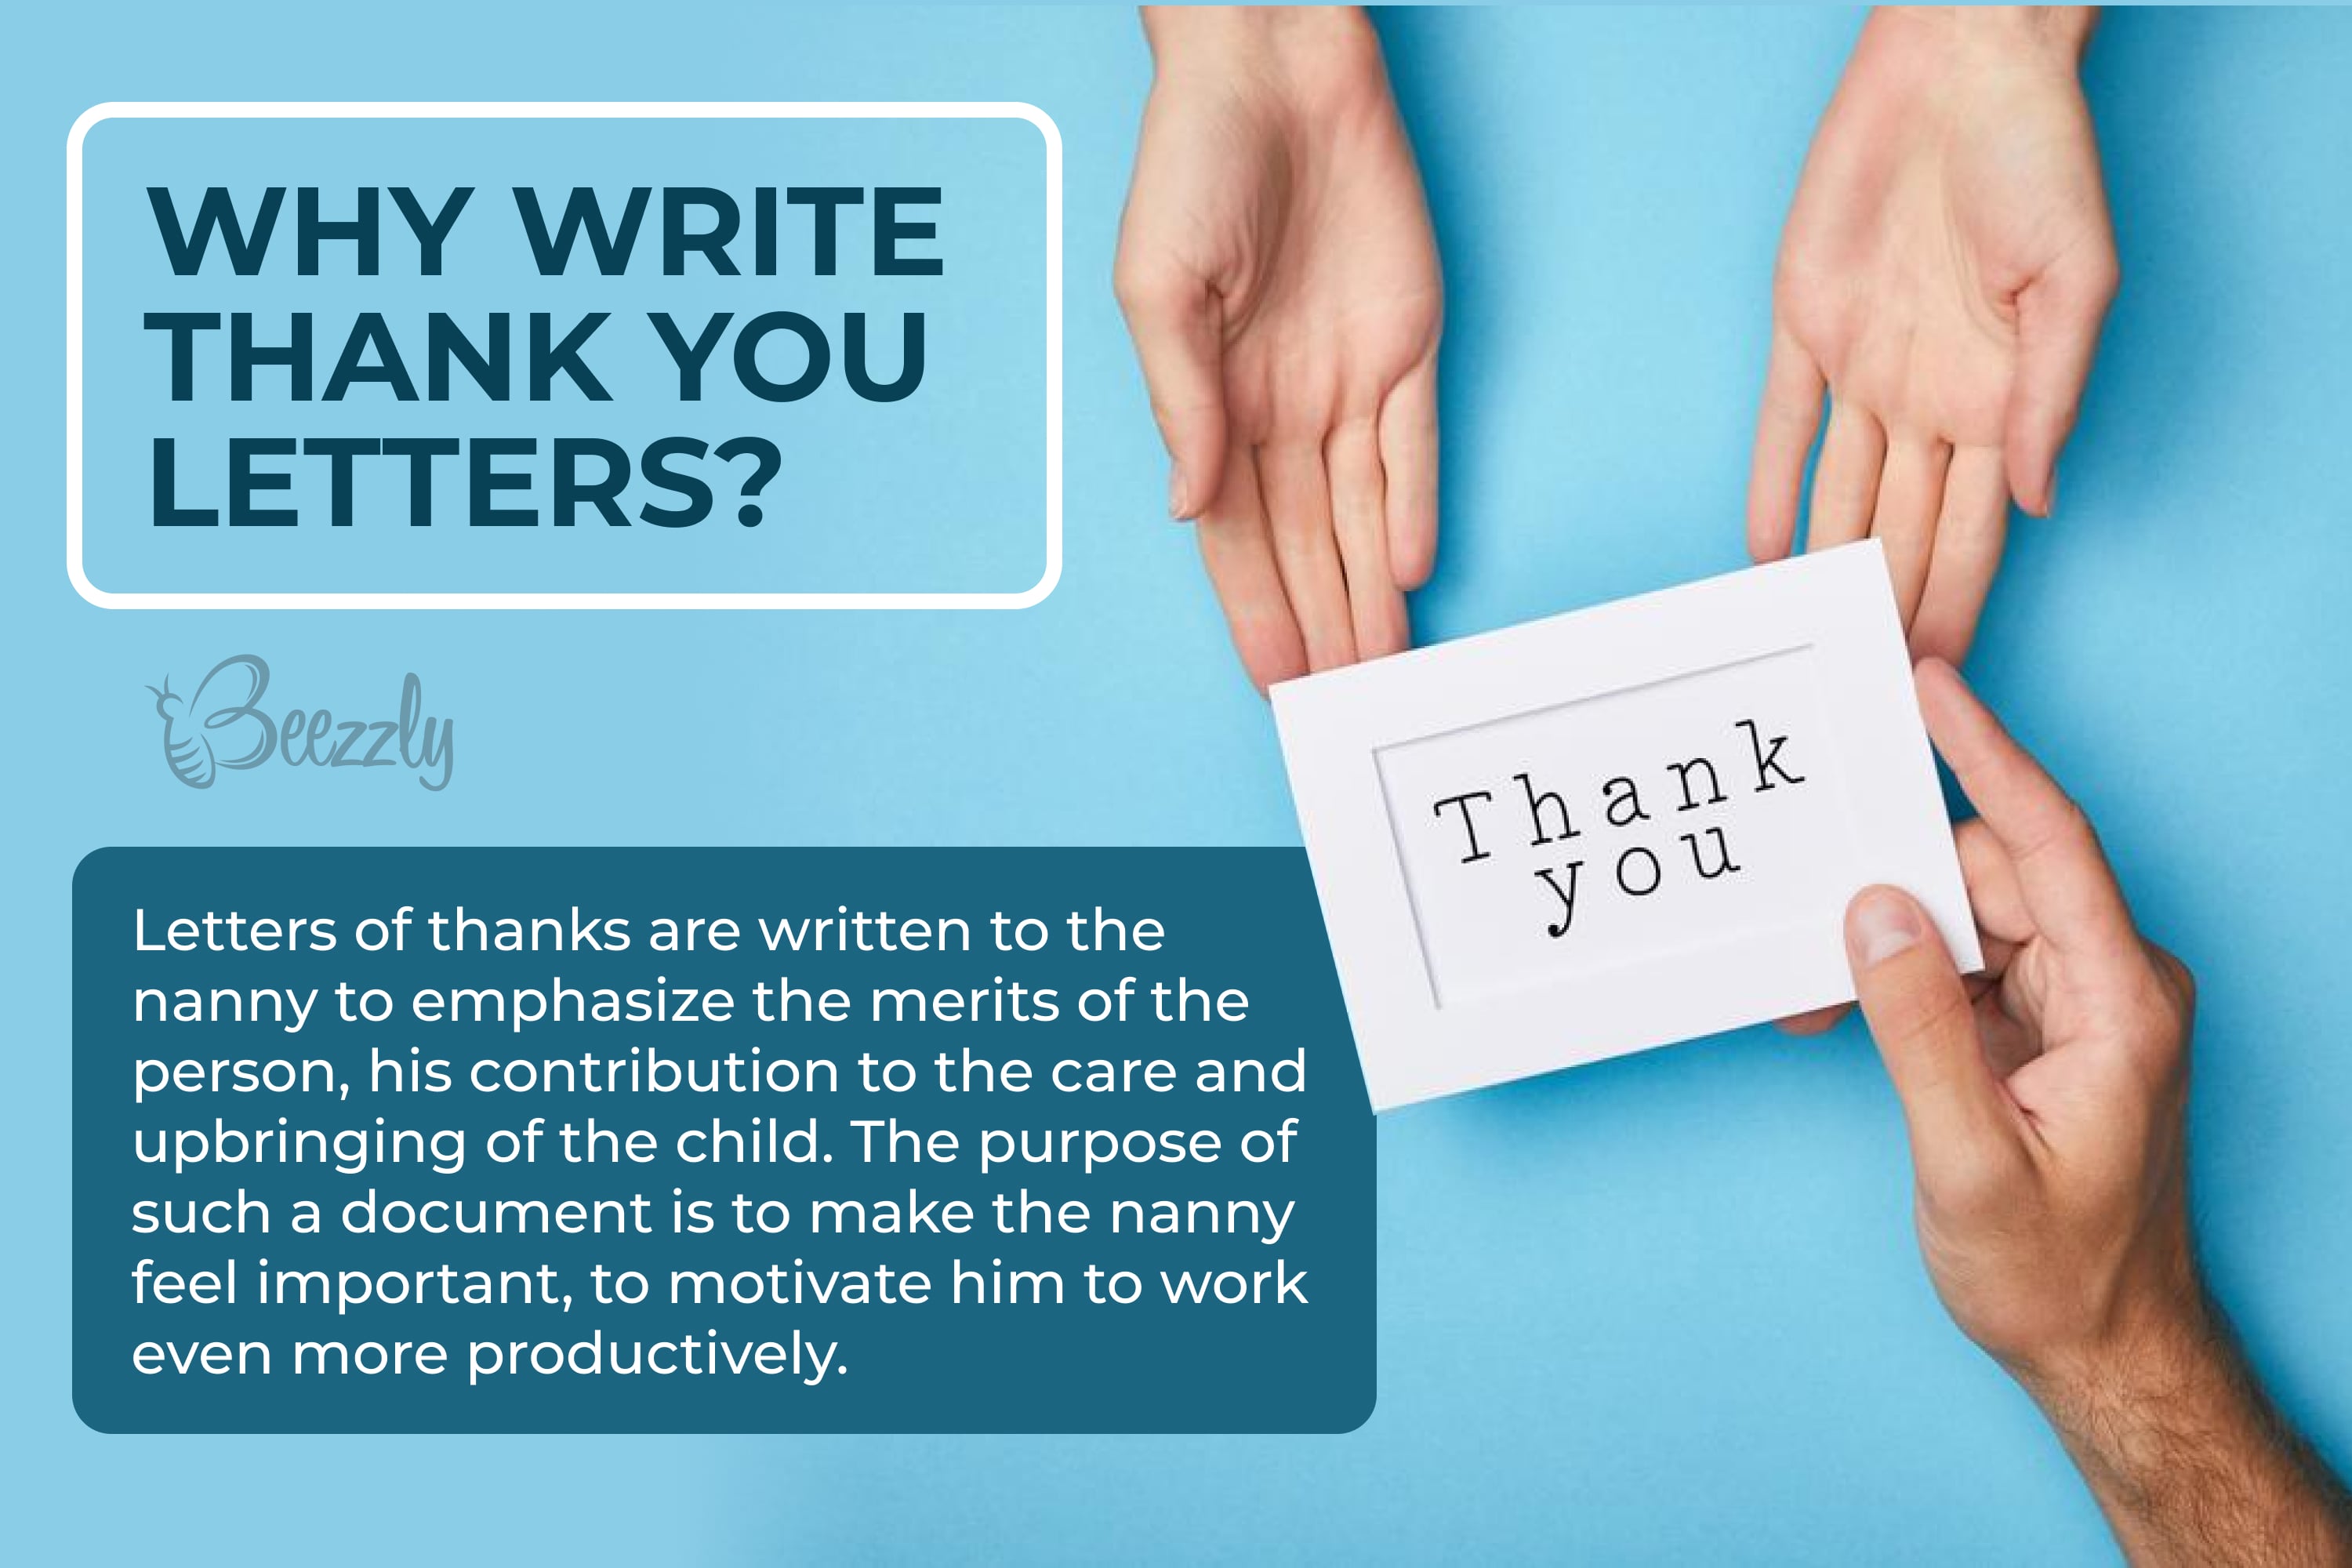 Why Write Thank You Letters